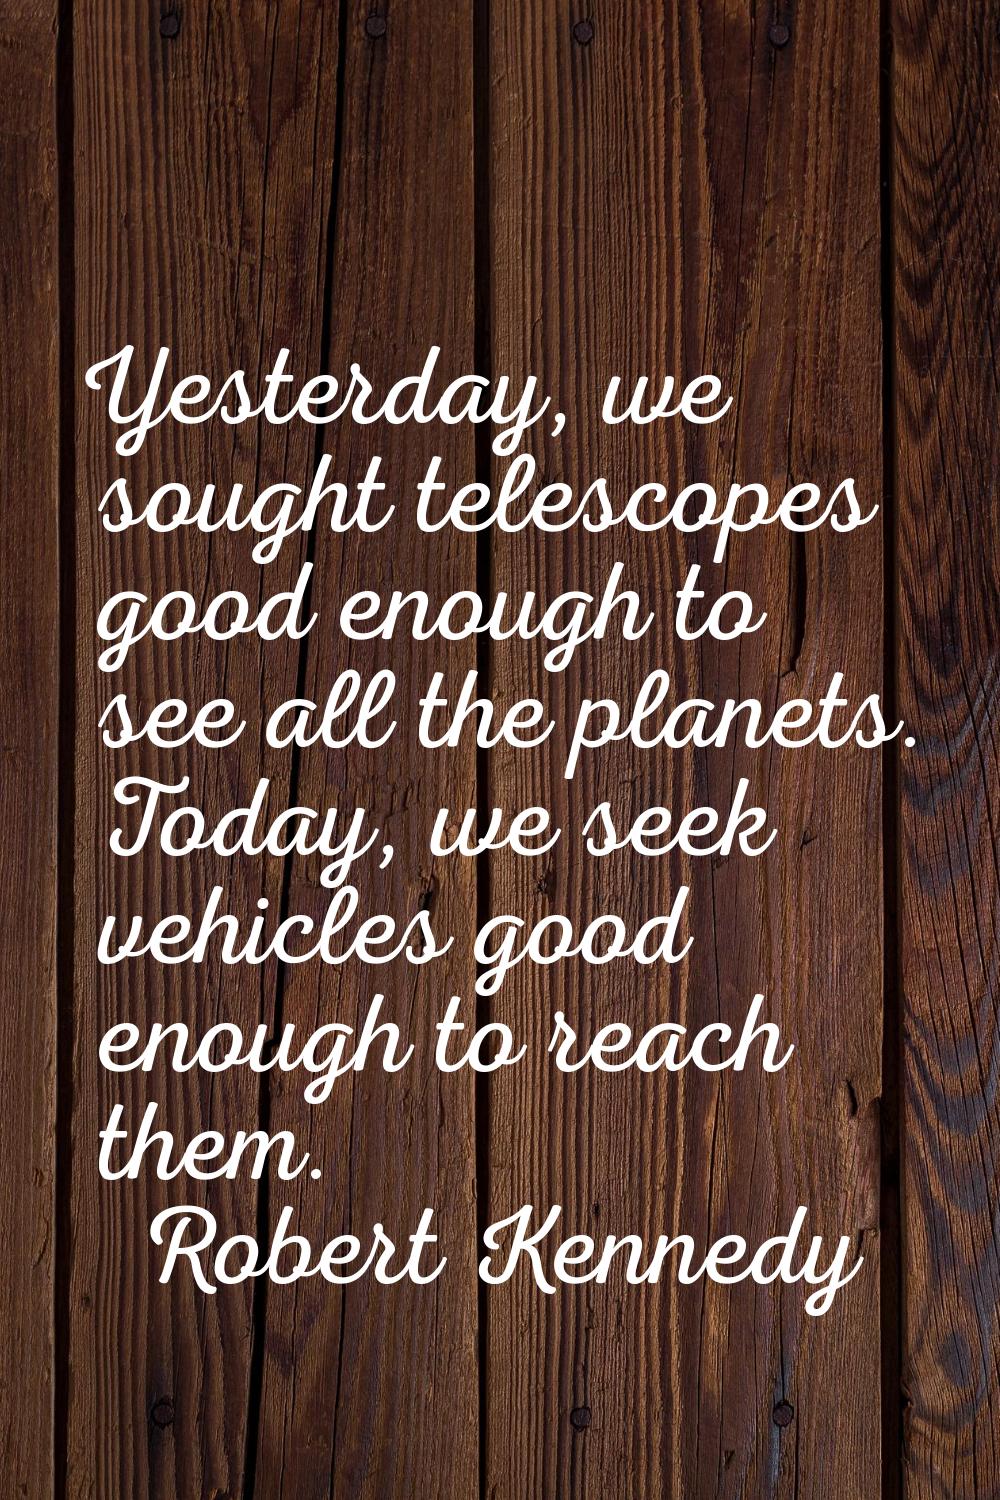 Yesterday, we sought telescopes good enough to see all the planets. Today, we seek vehicles good en